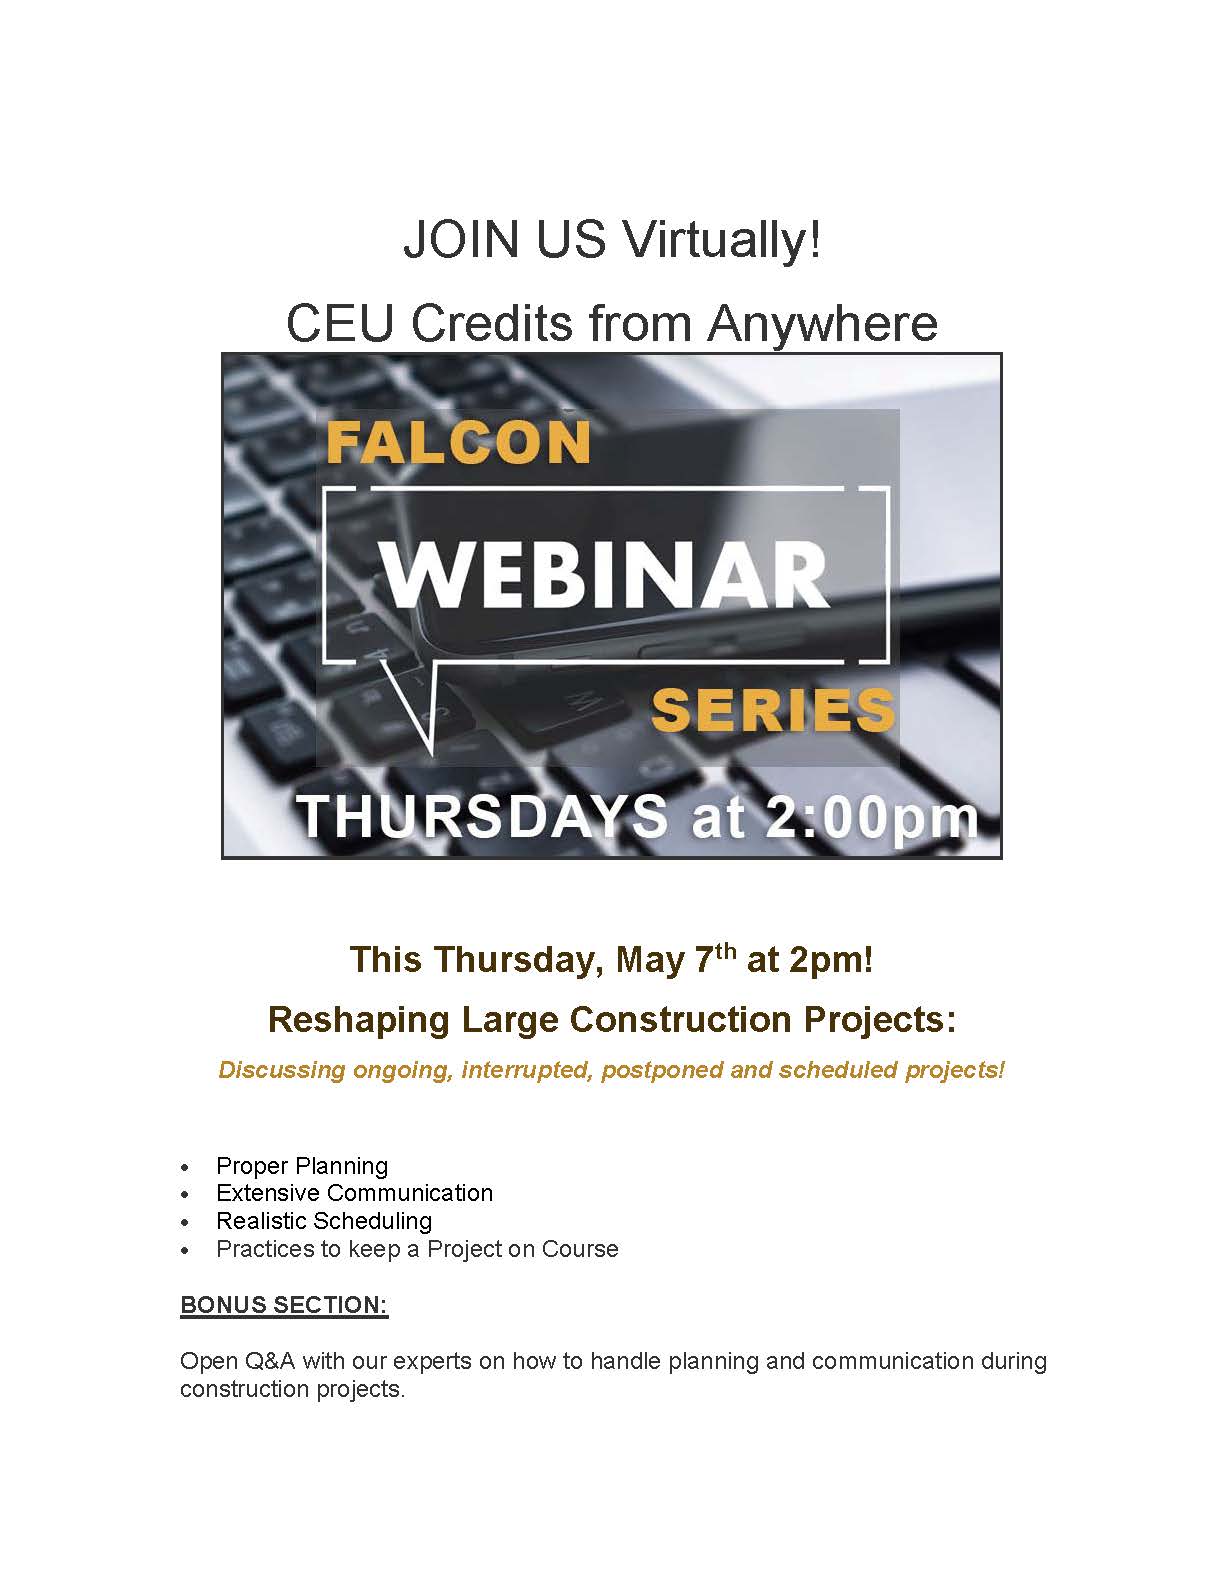 Reshaping Large Construction Projects Webinar this Thursday, May 7th at 2pm! by The Falcon Group